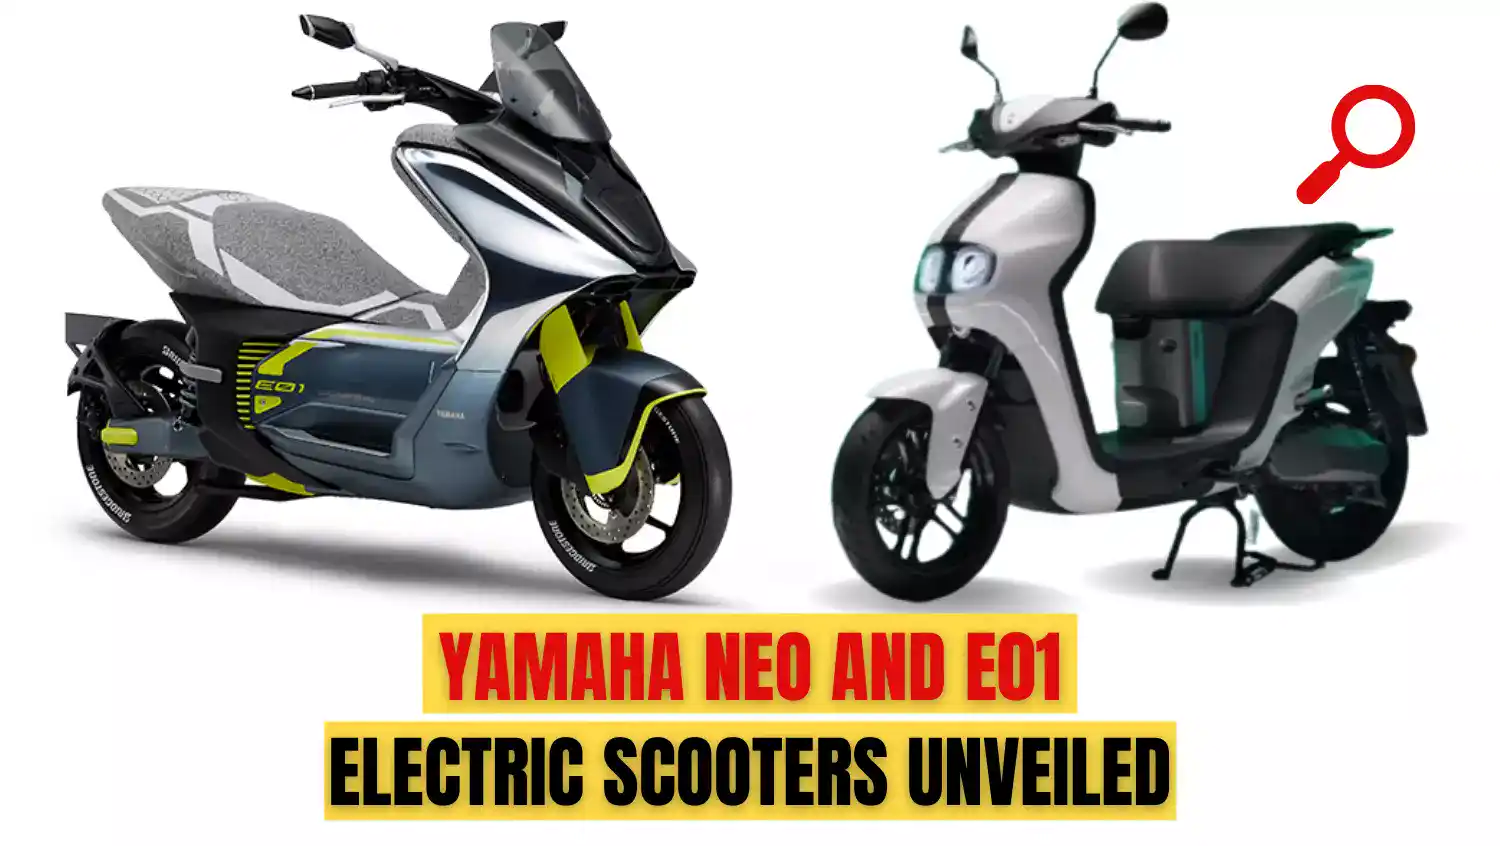 Yamaha Neo and E01 electric scooters unveiled Check Range, Battery, Price, etc. 